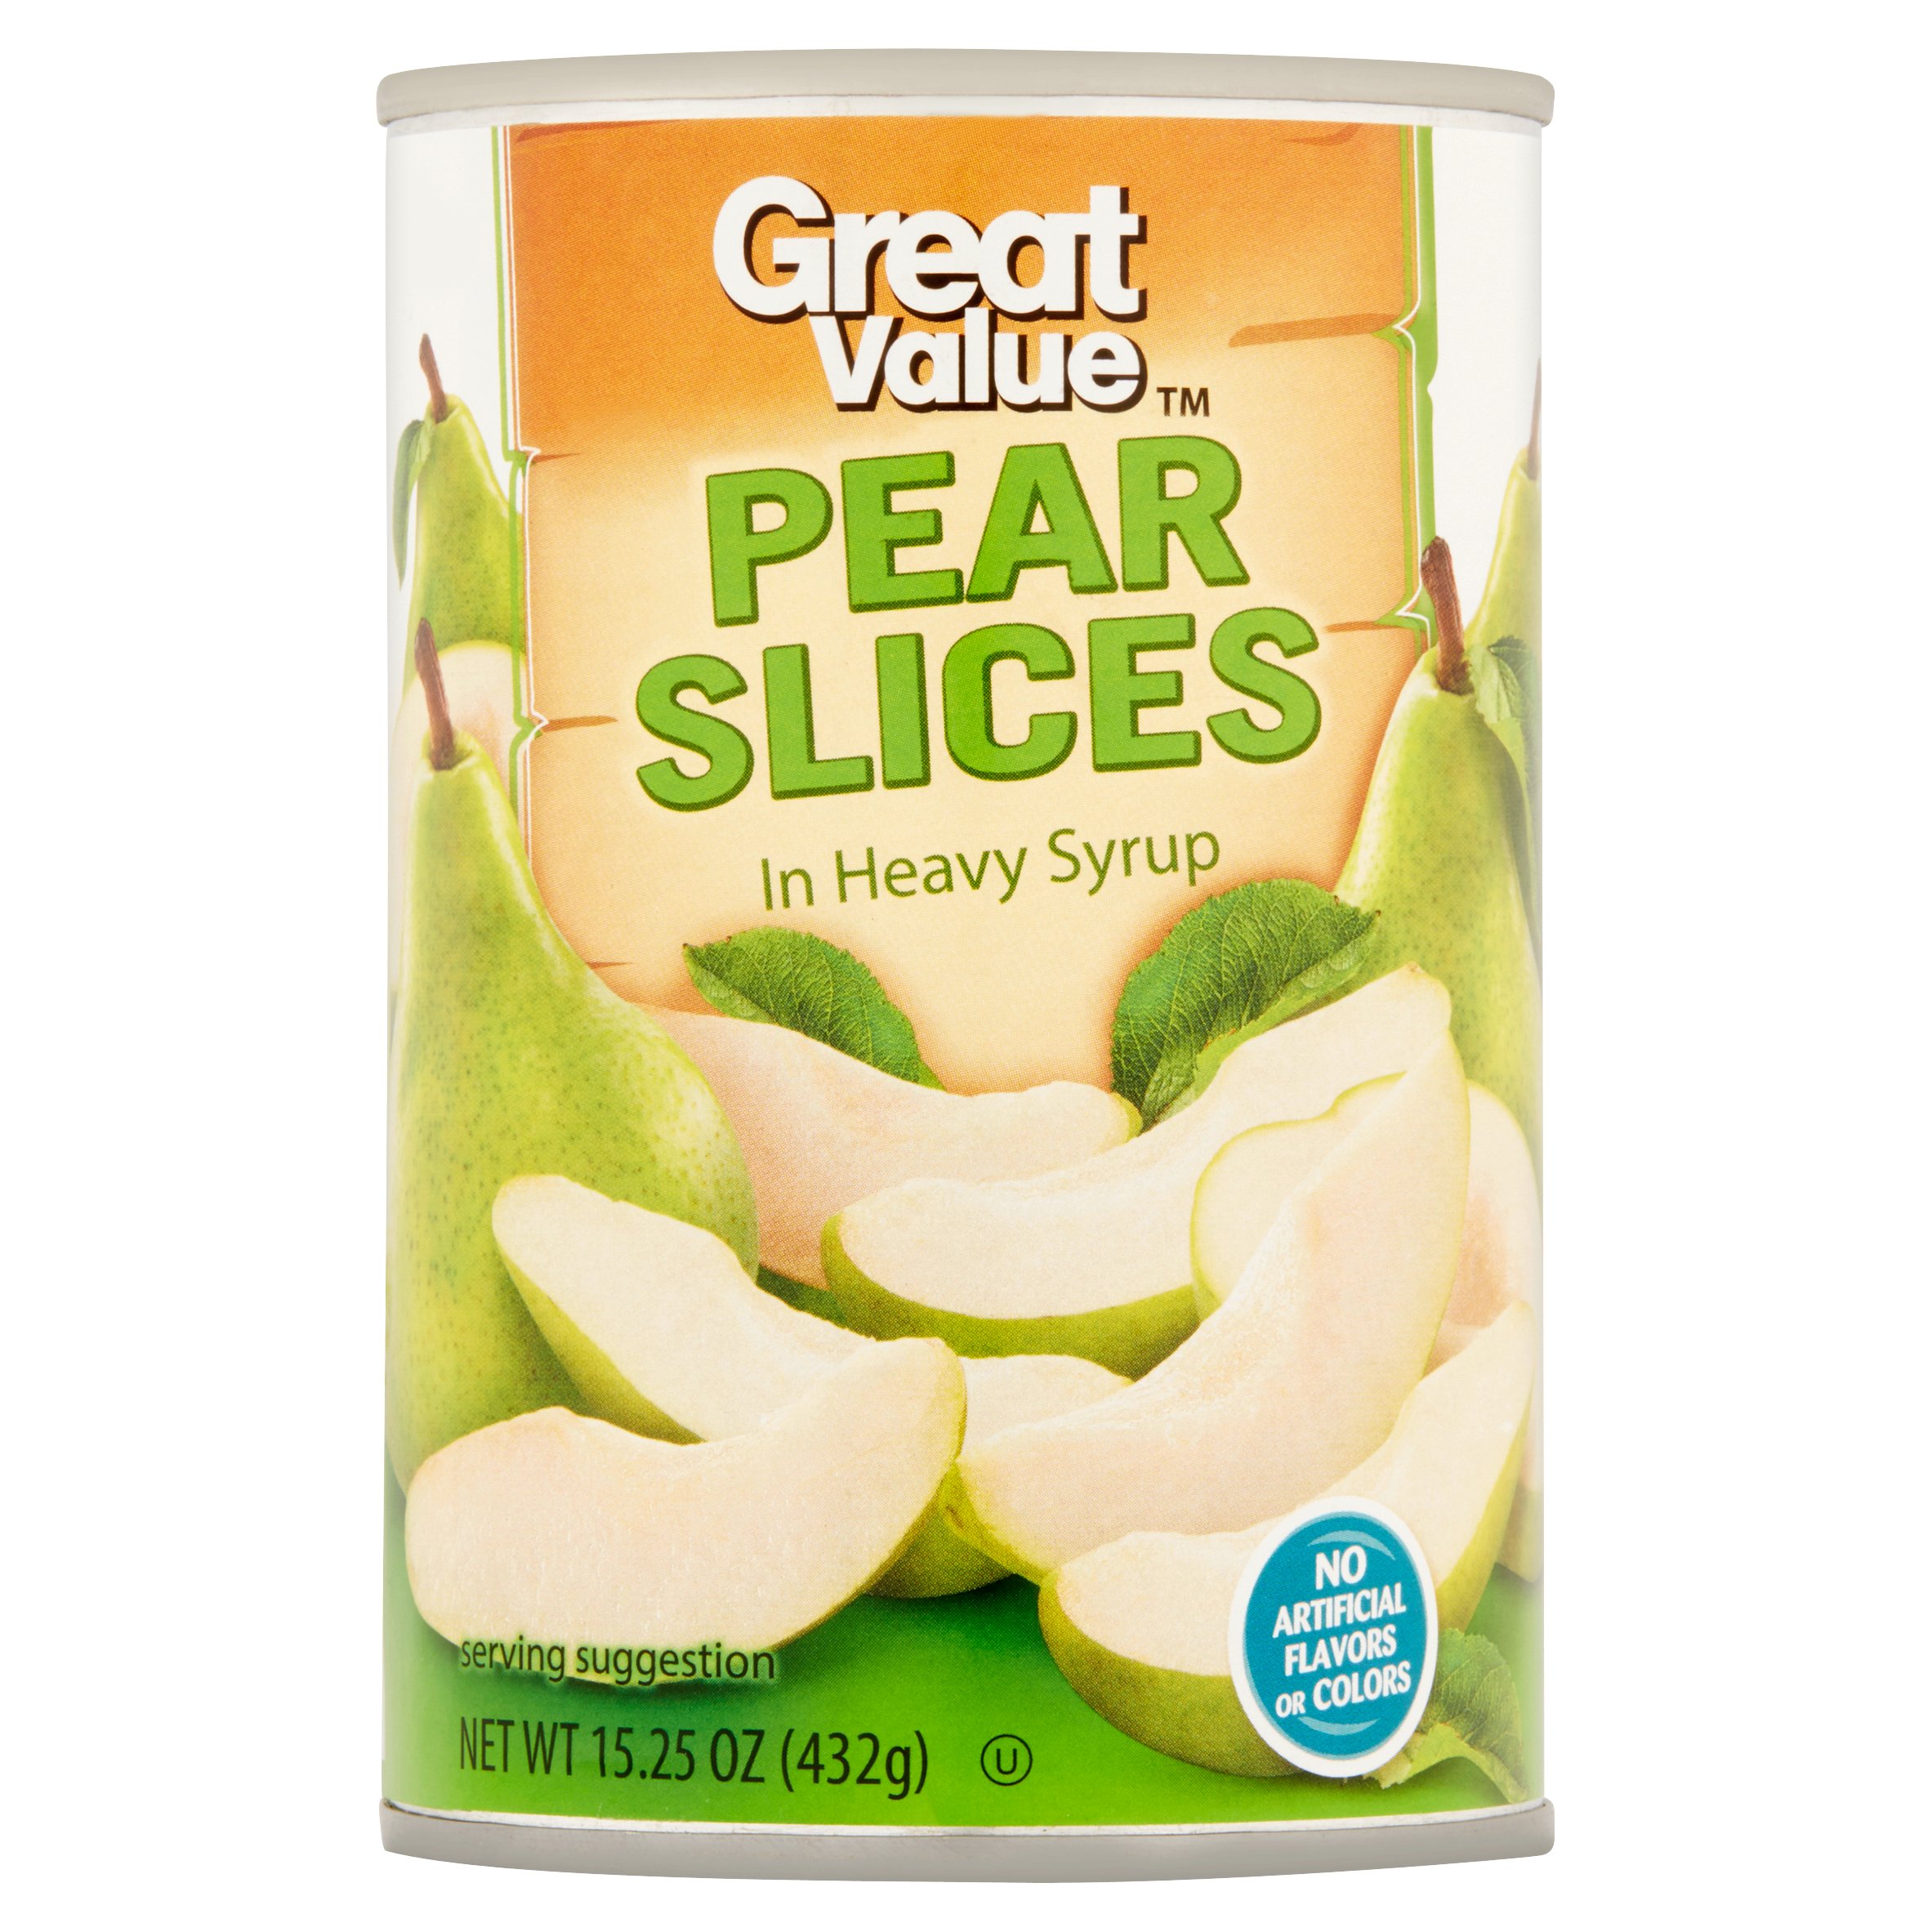 (4 Pack) Great Value Pear Slices in Heavy Syrup, 15.25 Oz Image